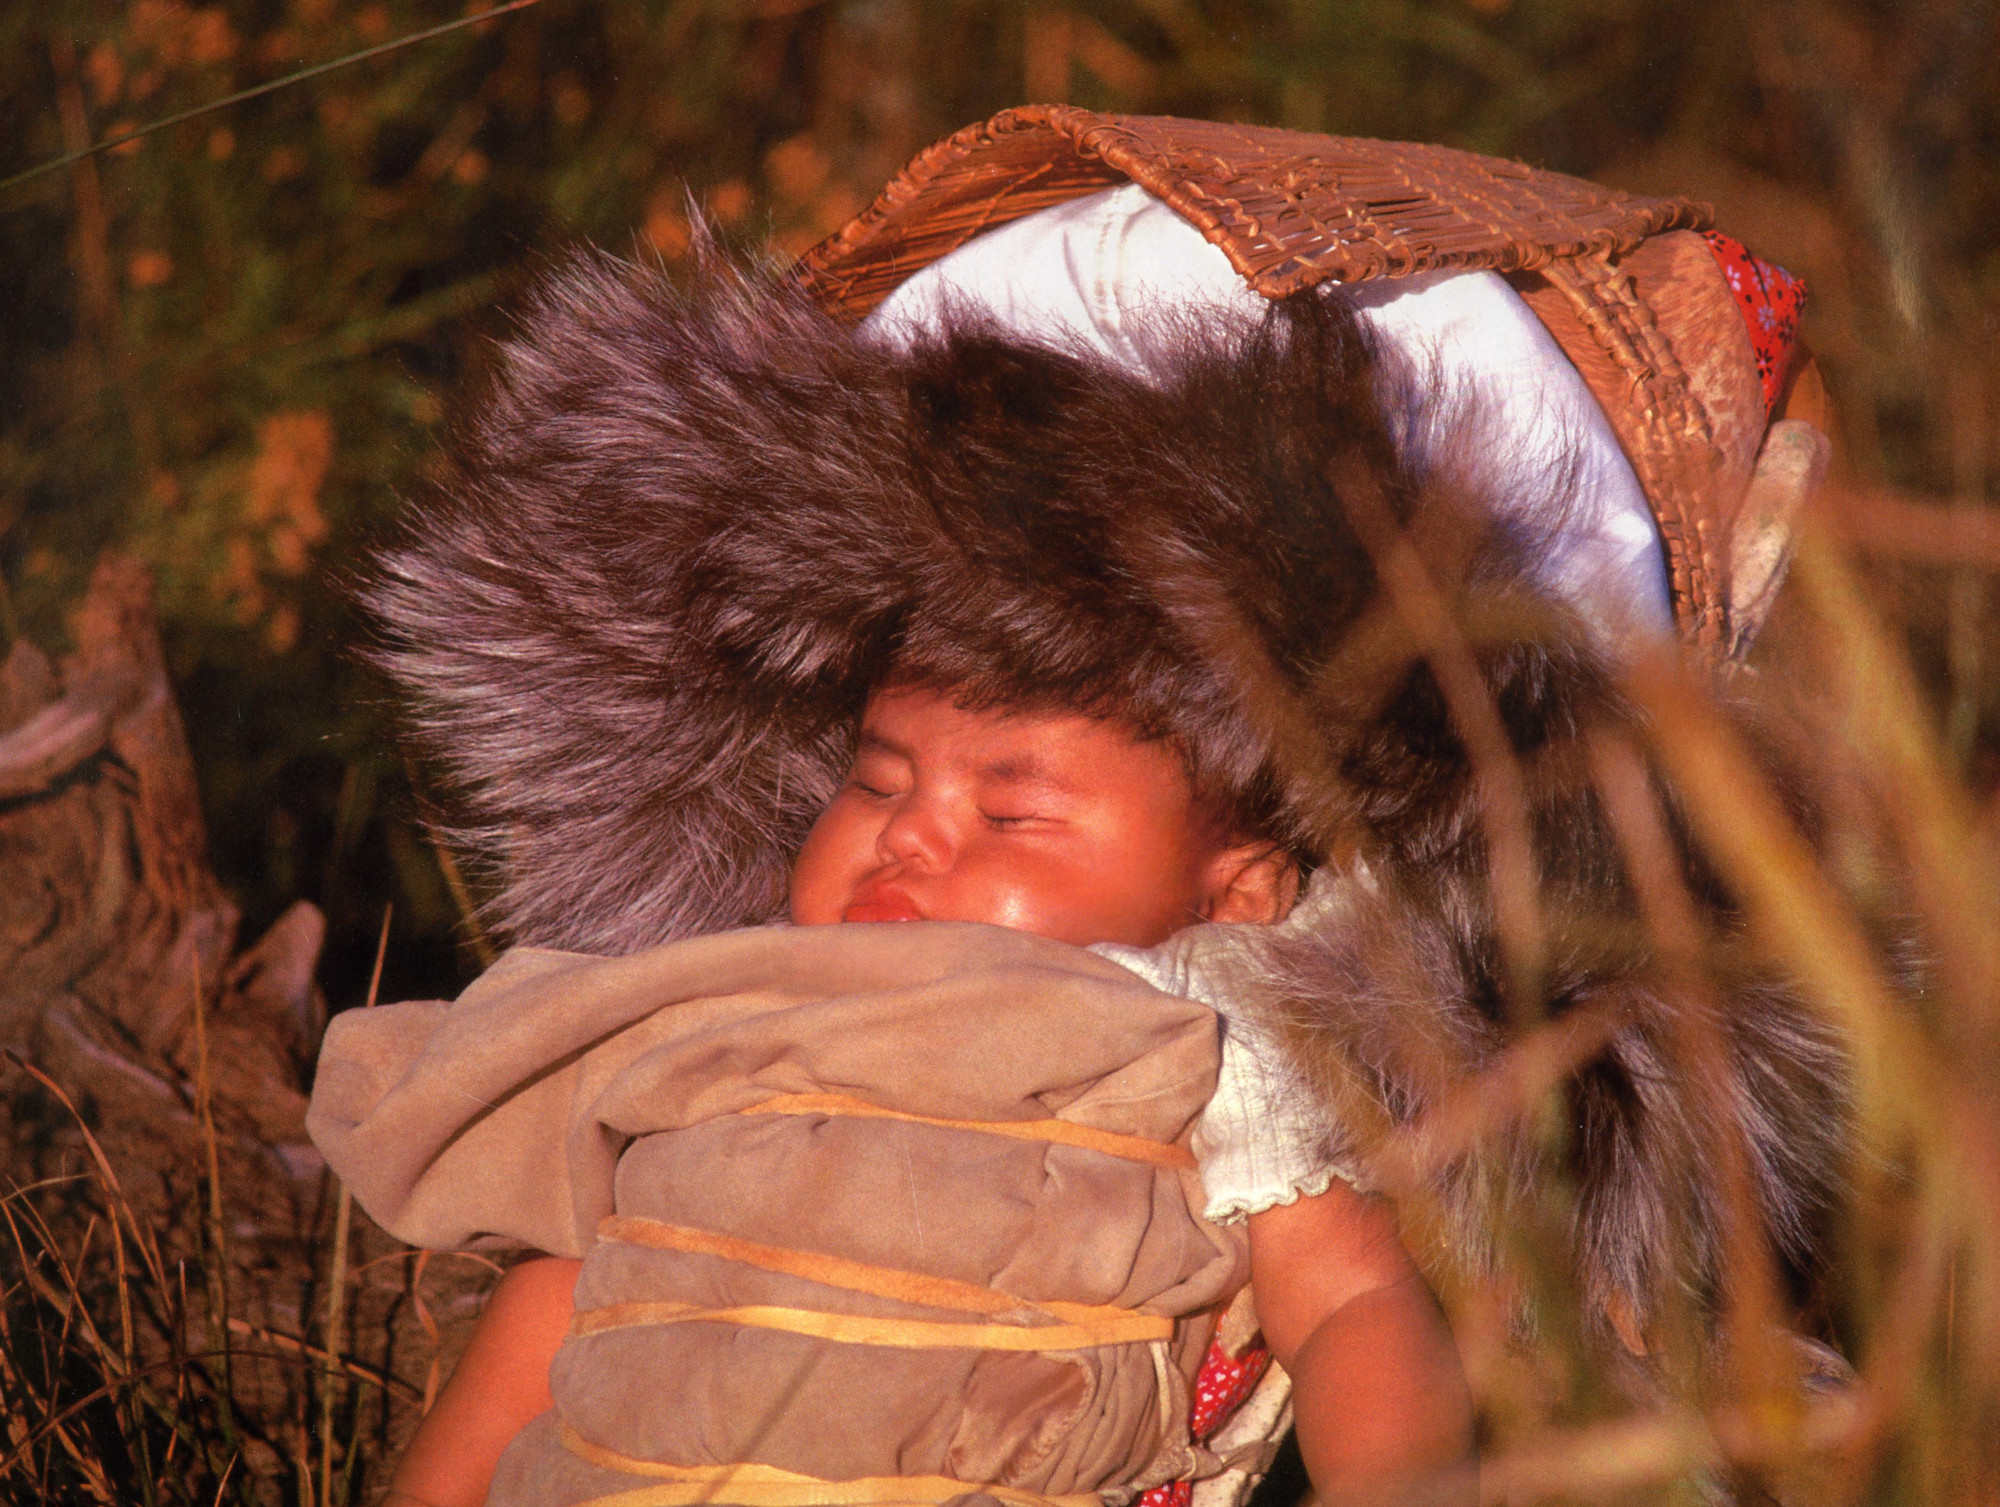 Sleeping baby in traditional native garb